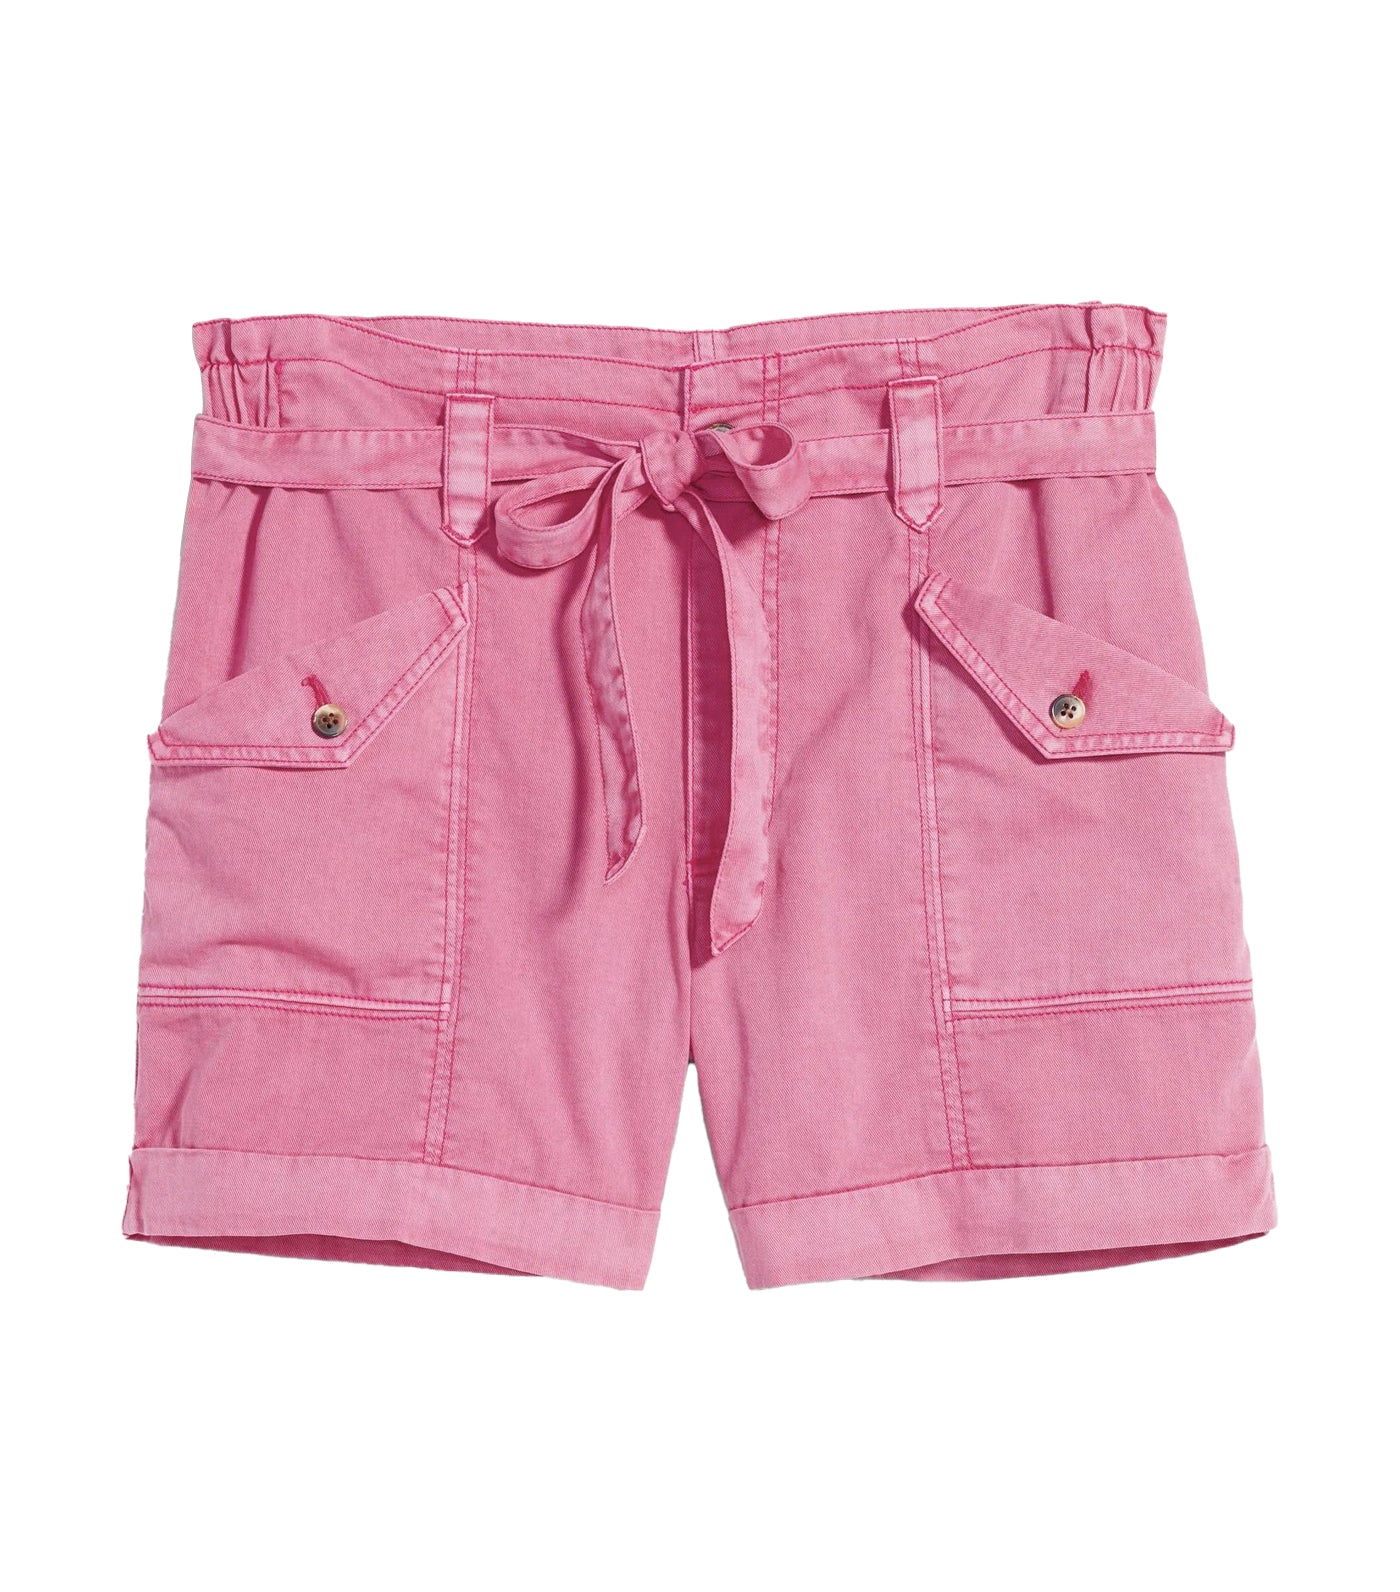 Extra High-Waisted Tie-Front Cargo Workwear Shorts for Women 4-inch Inseam Dragon Fruit